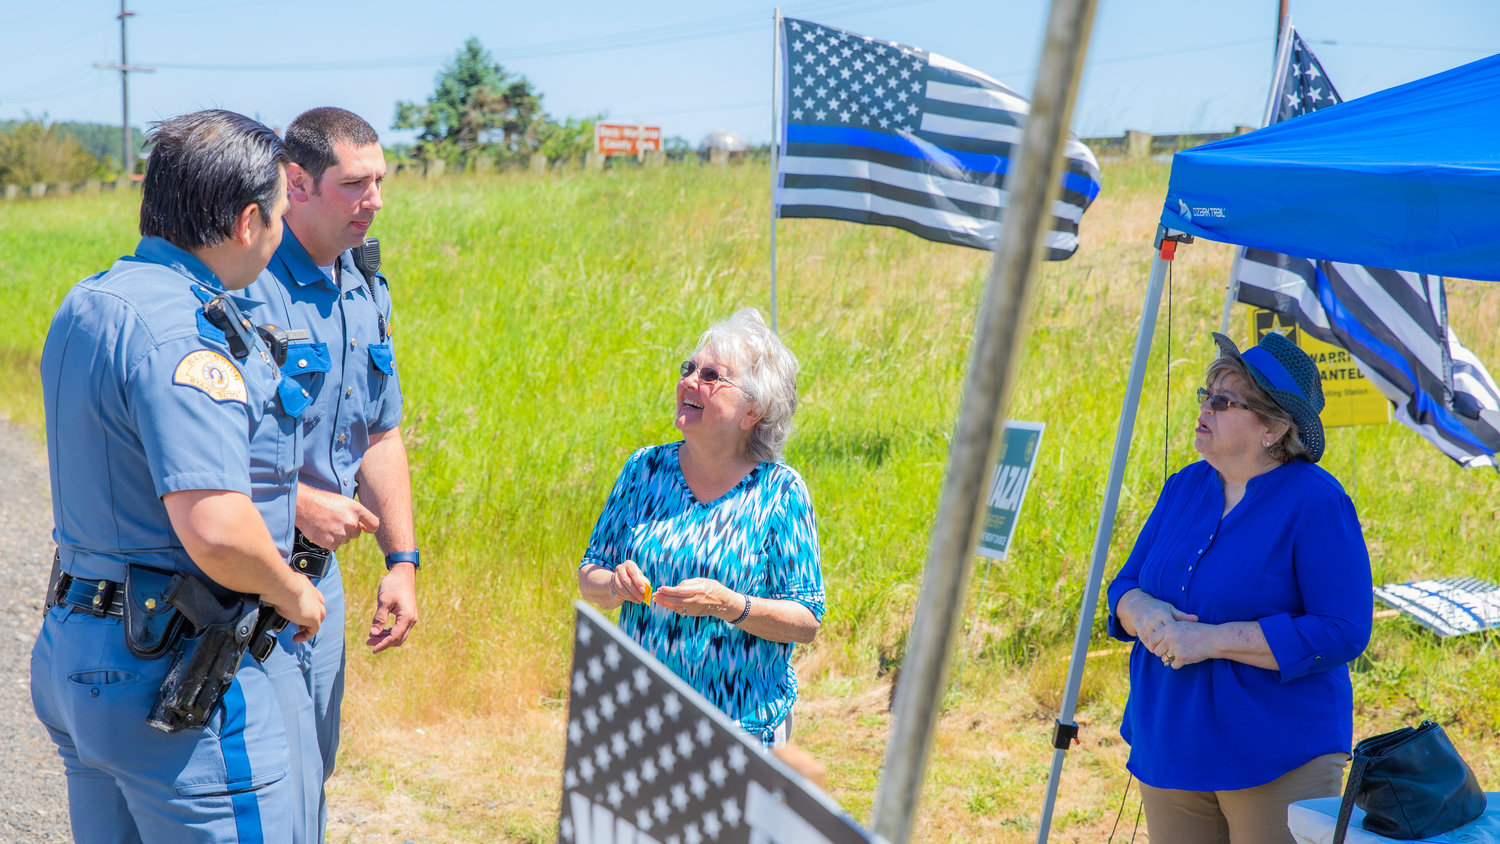 Members of the Washington State Patrol mingle with attendees at a “Back the Blue” event in Adna on Saturday. The event was hosted by Adna Grocery.